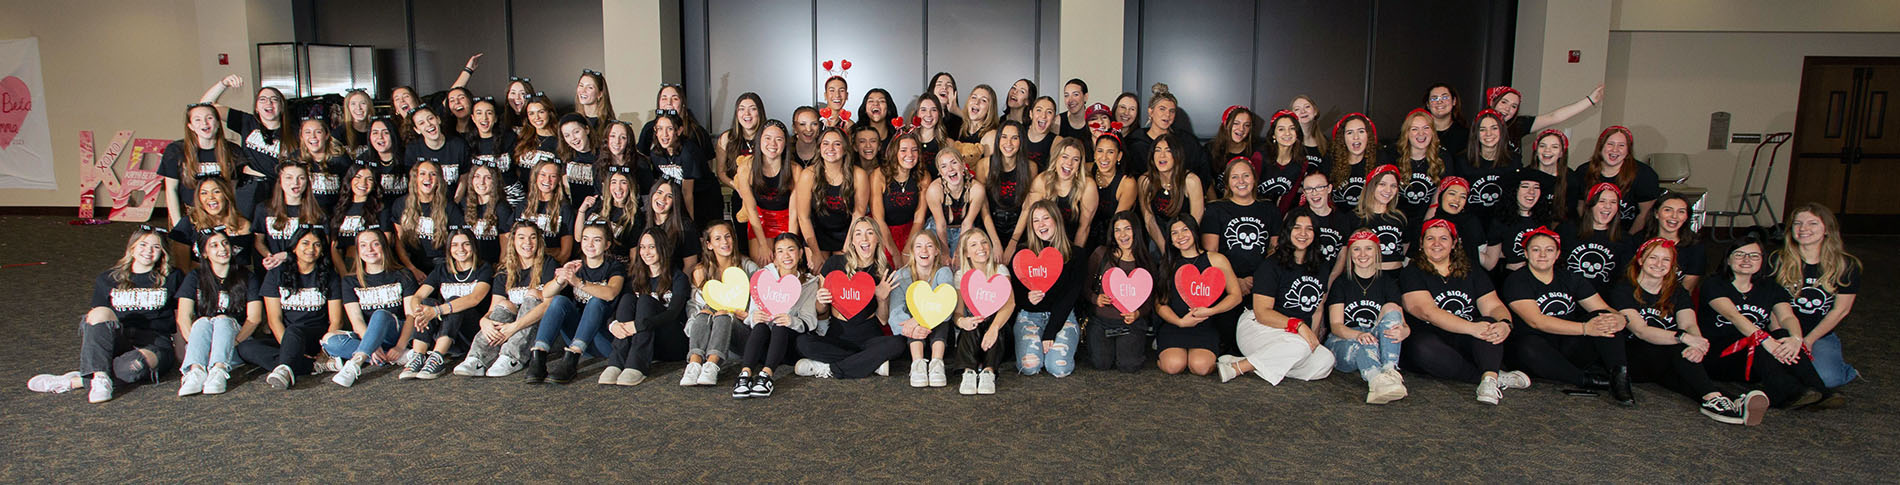 UDM sororities pose for a group picture after bid day.